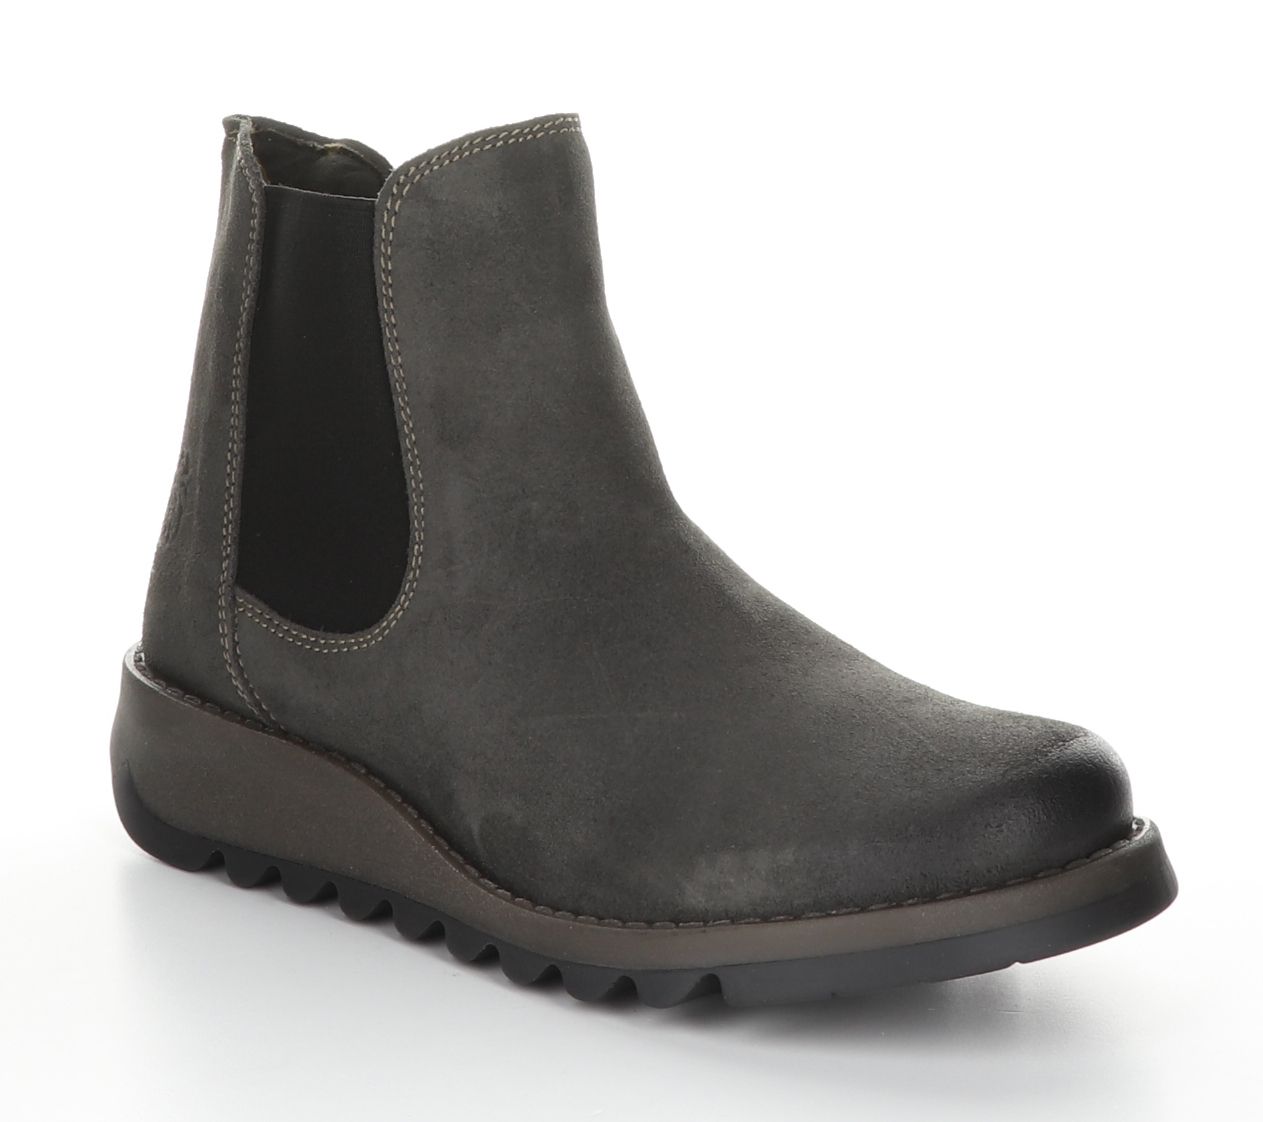 cheapest fly london boots